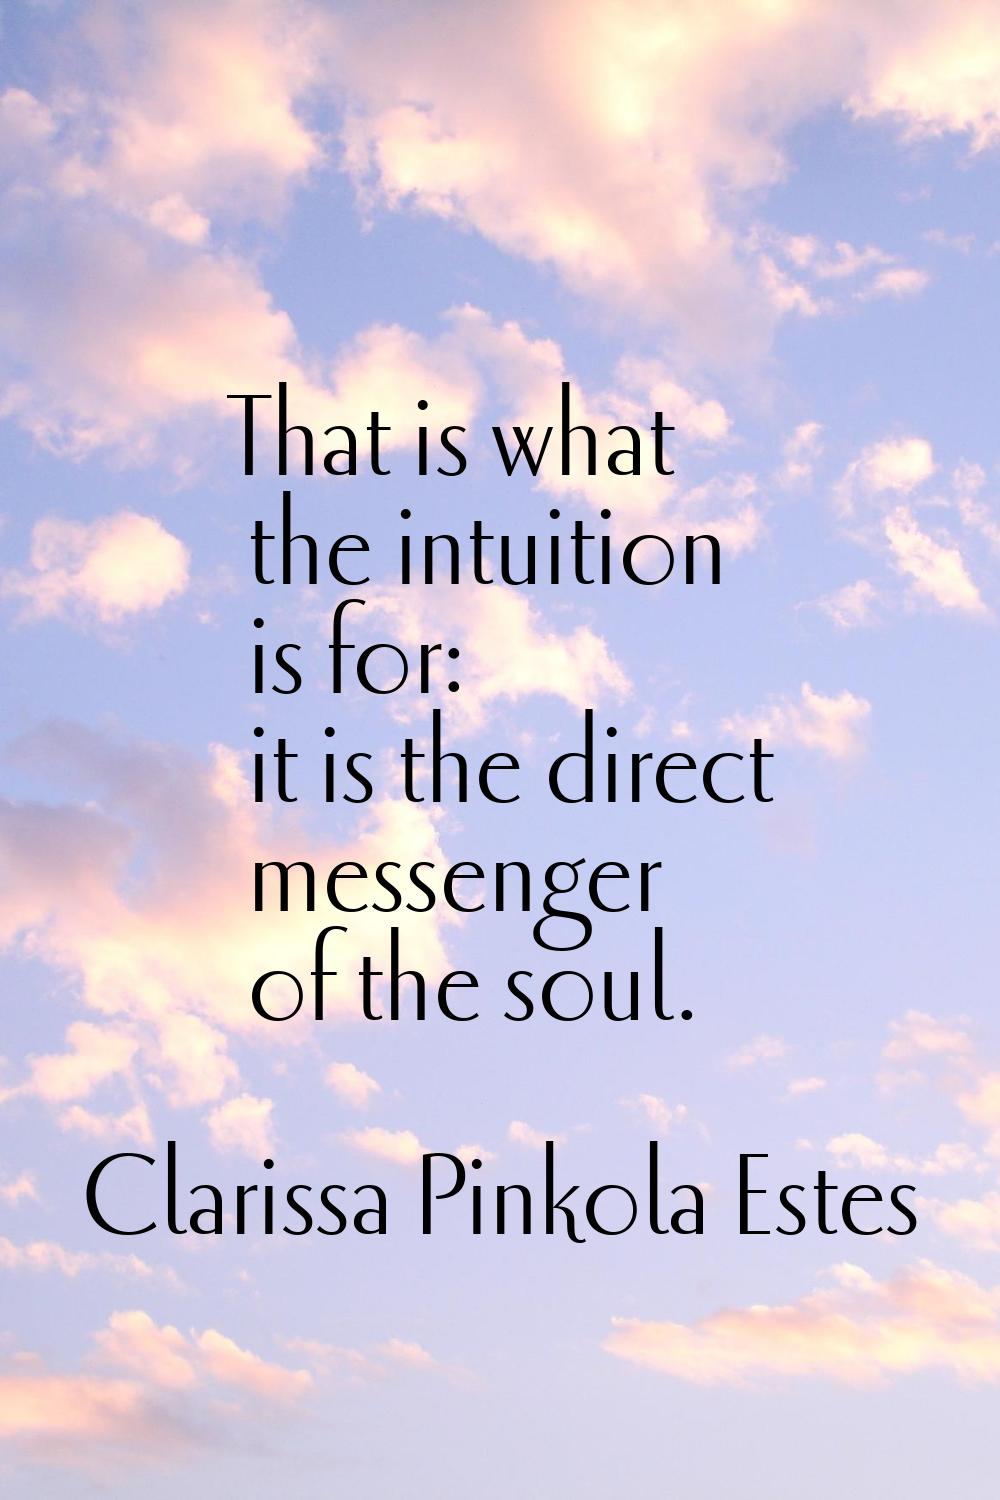 That is what the intuition is for: it is the direct messenger of the soul.